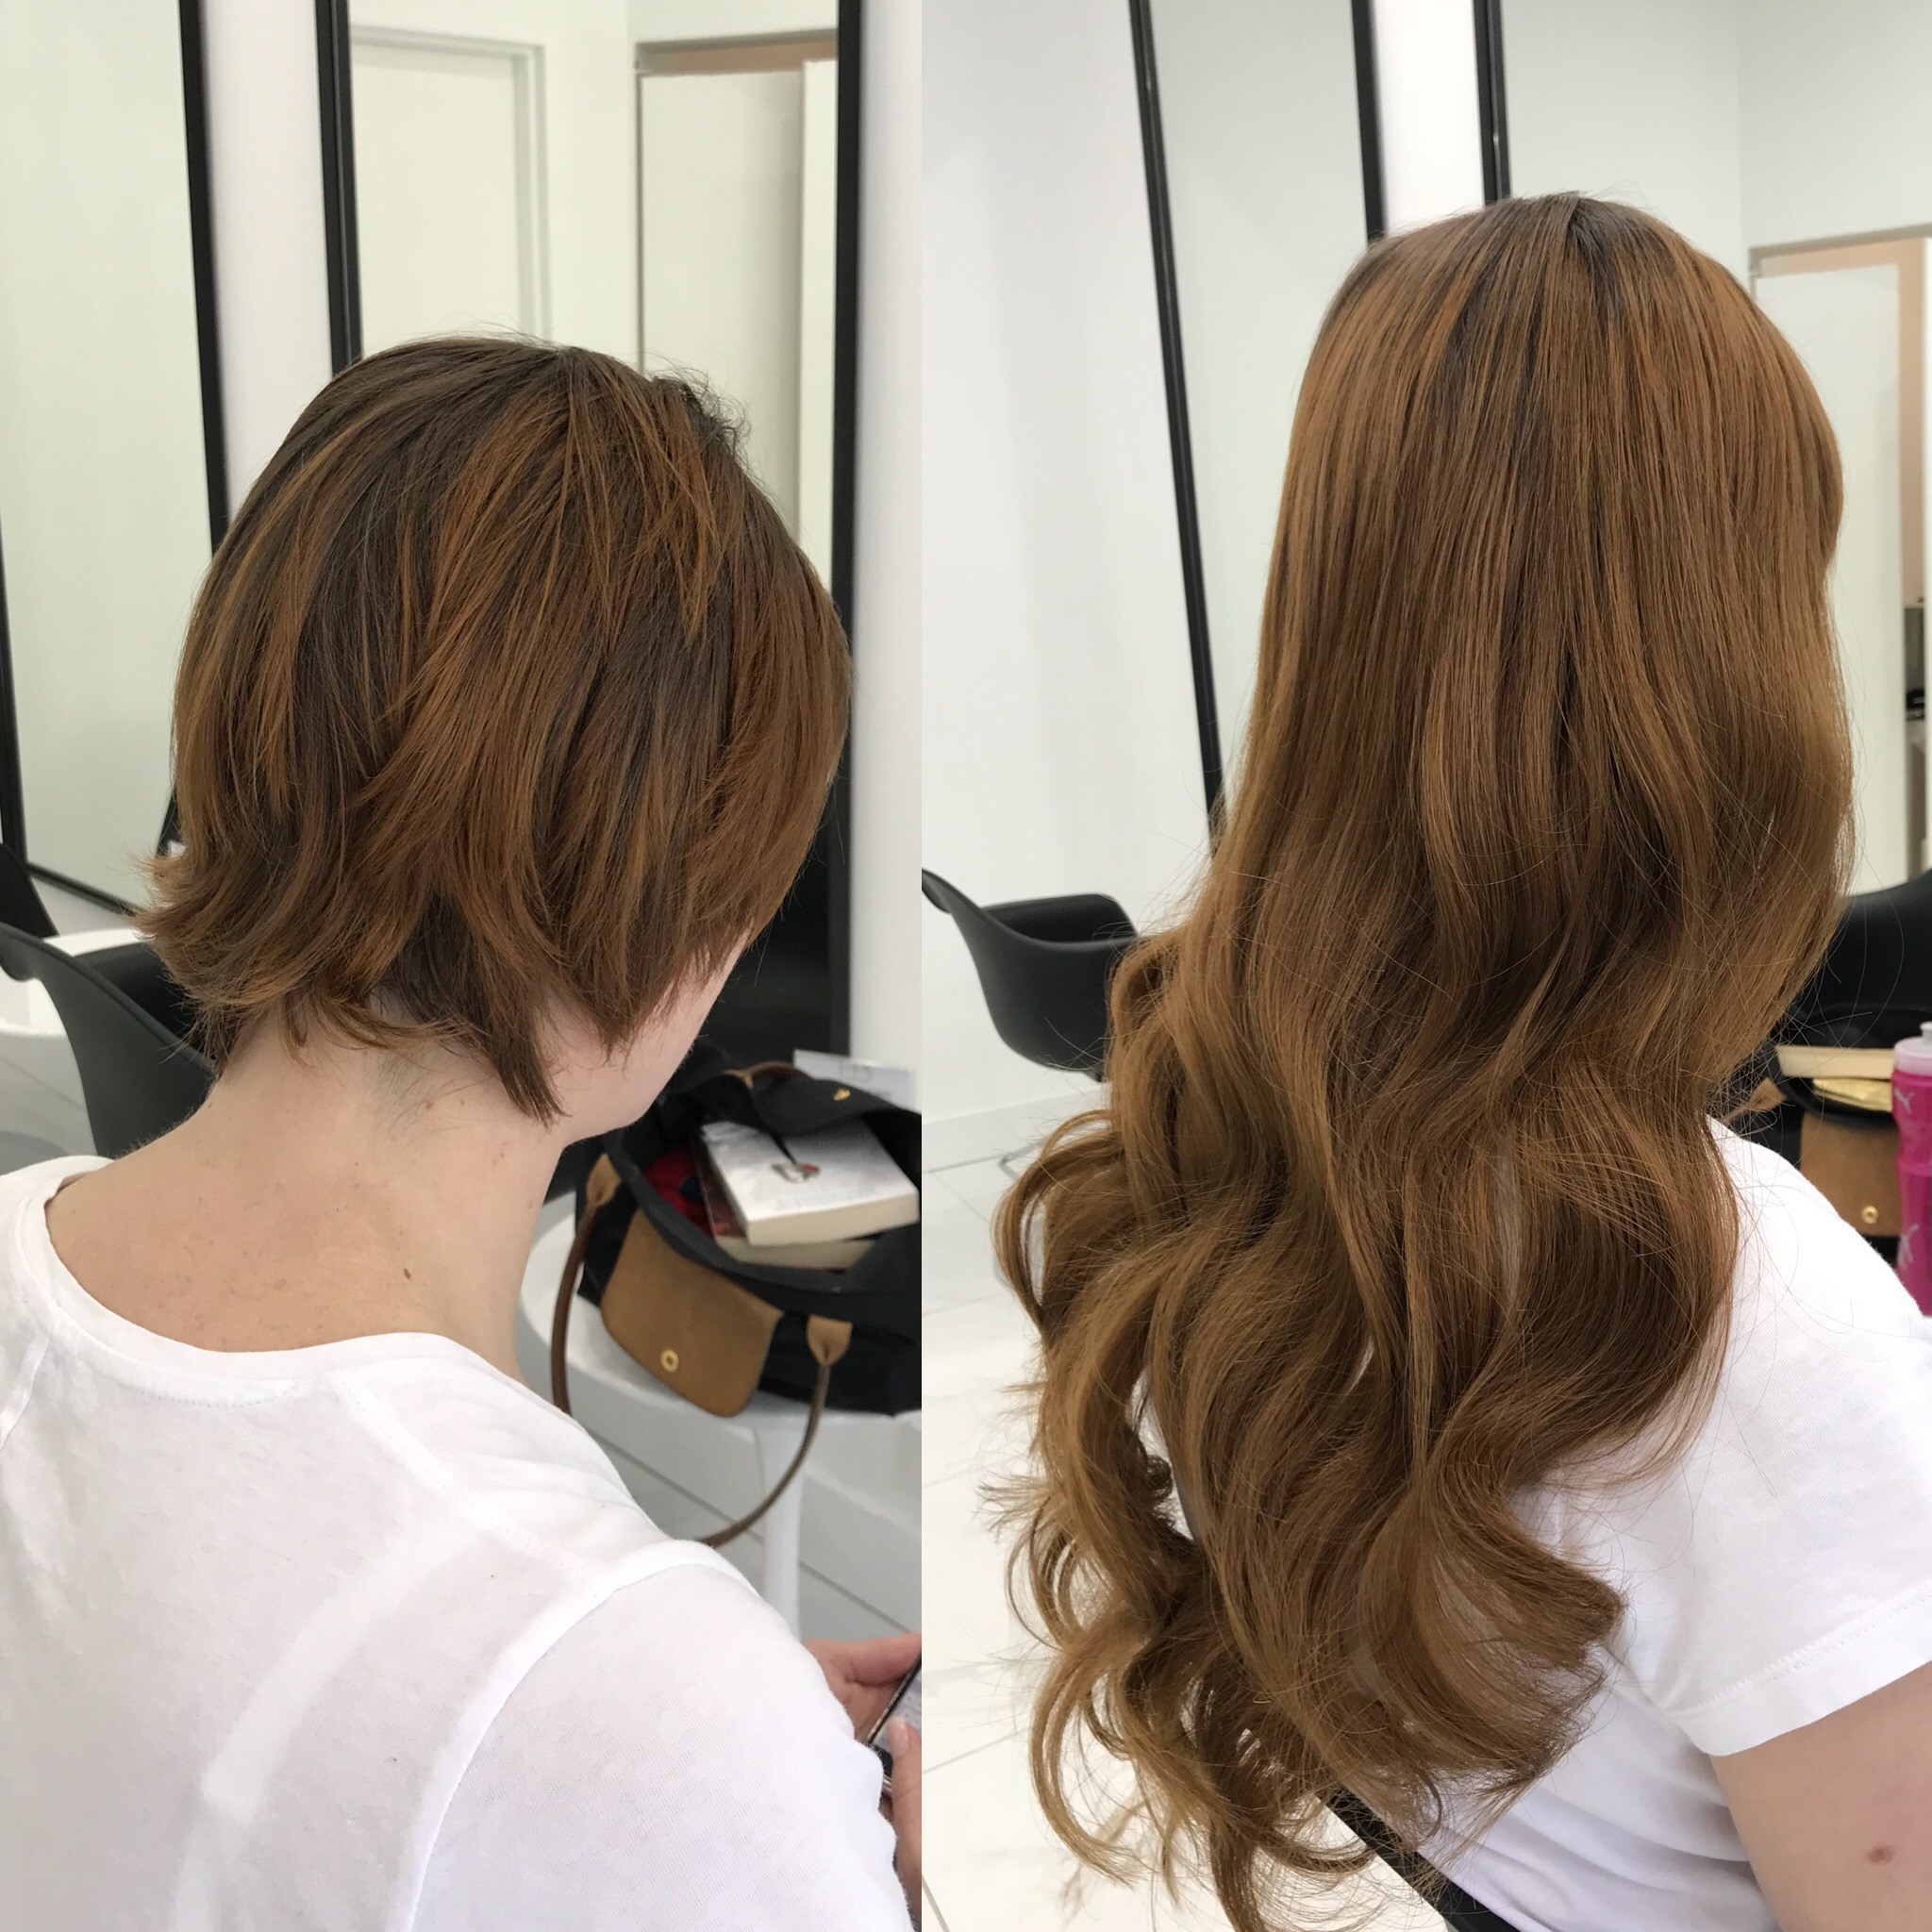 Clip in Hair Extensions Before and After Images - Australia's leading Hair  Extension Salon - Hair Extension Bar